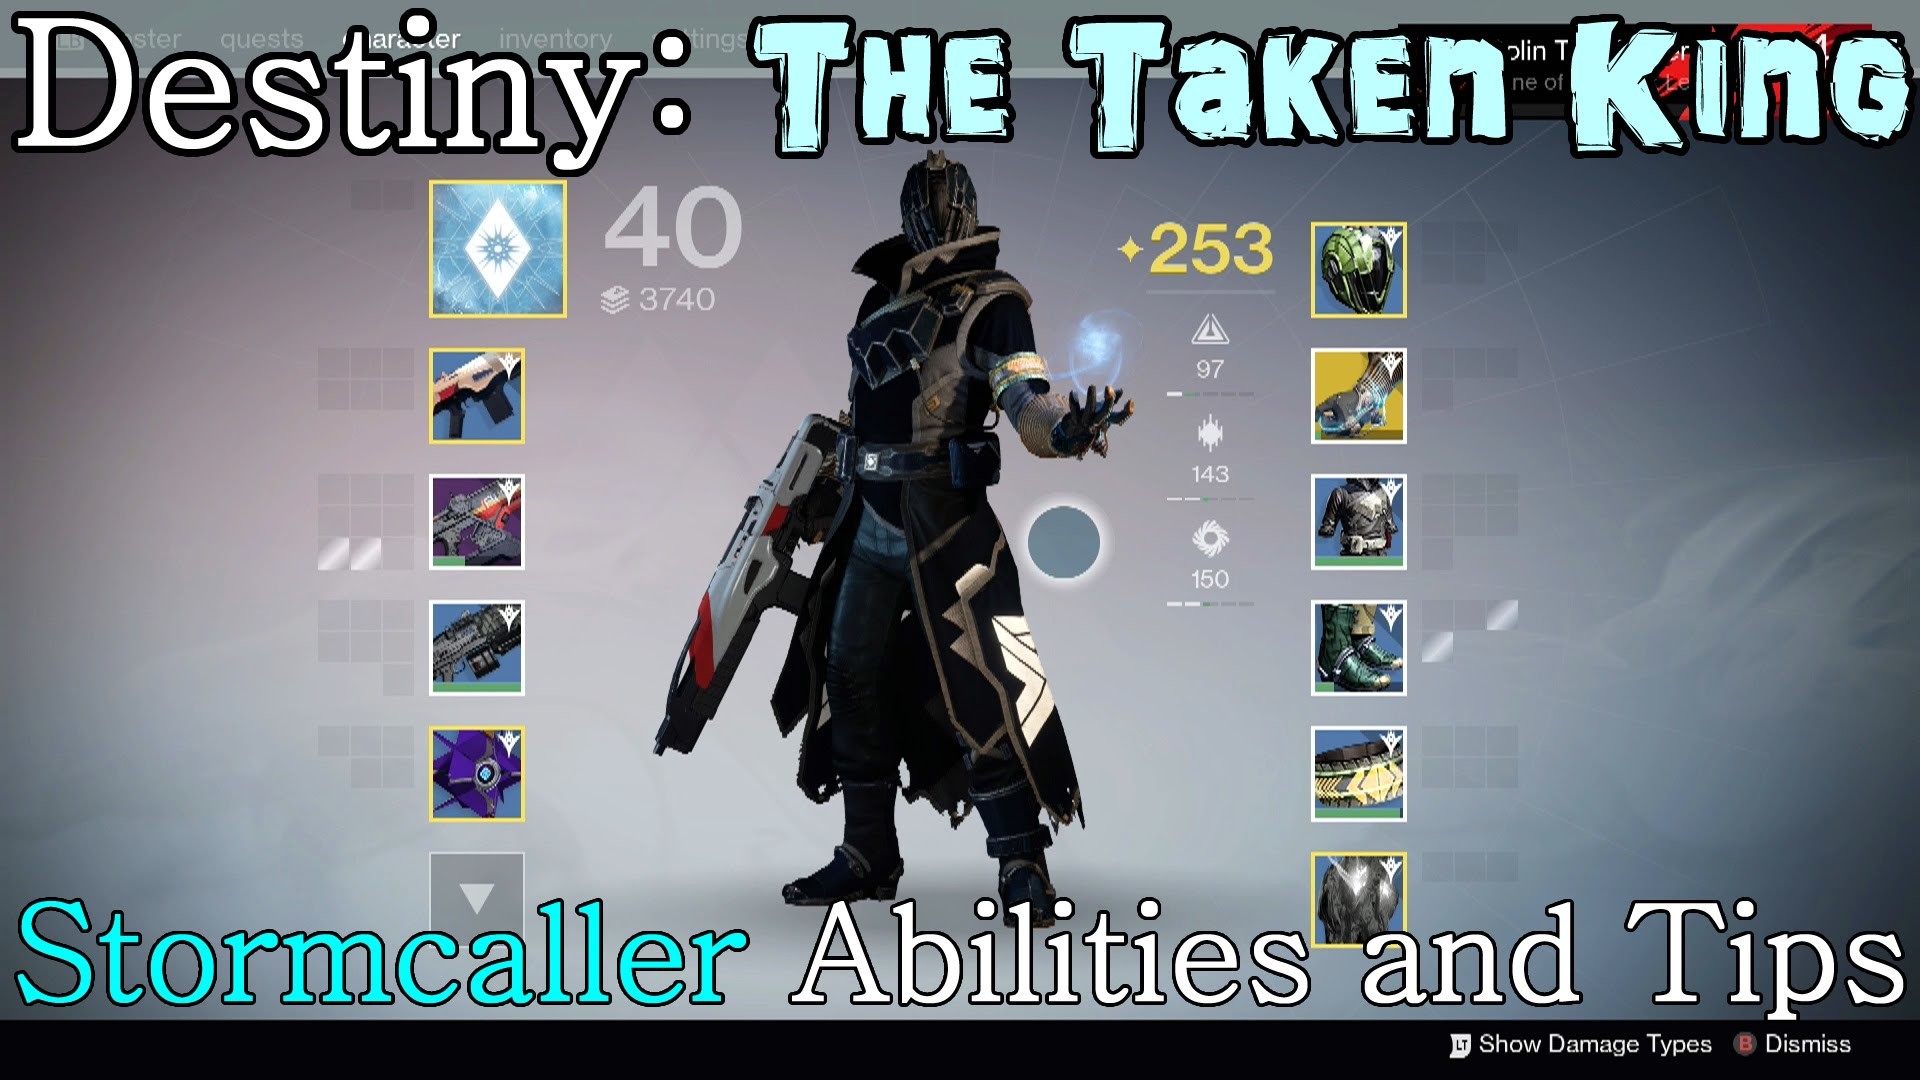 1920x1080 Destiny: The Taken King - New Warlock Subclass Abilities and Tips " Stormcaller" - YouTube